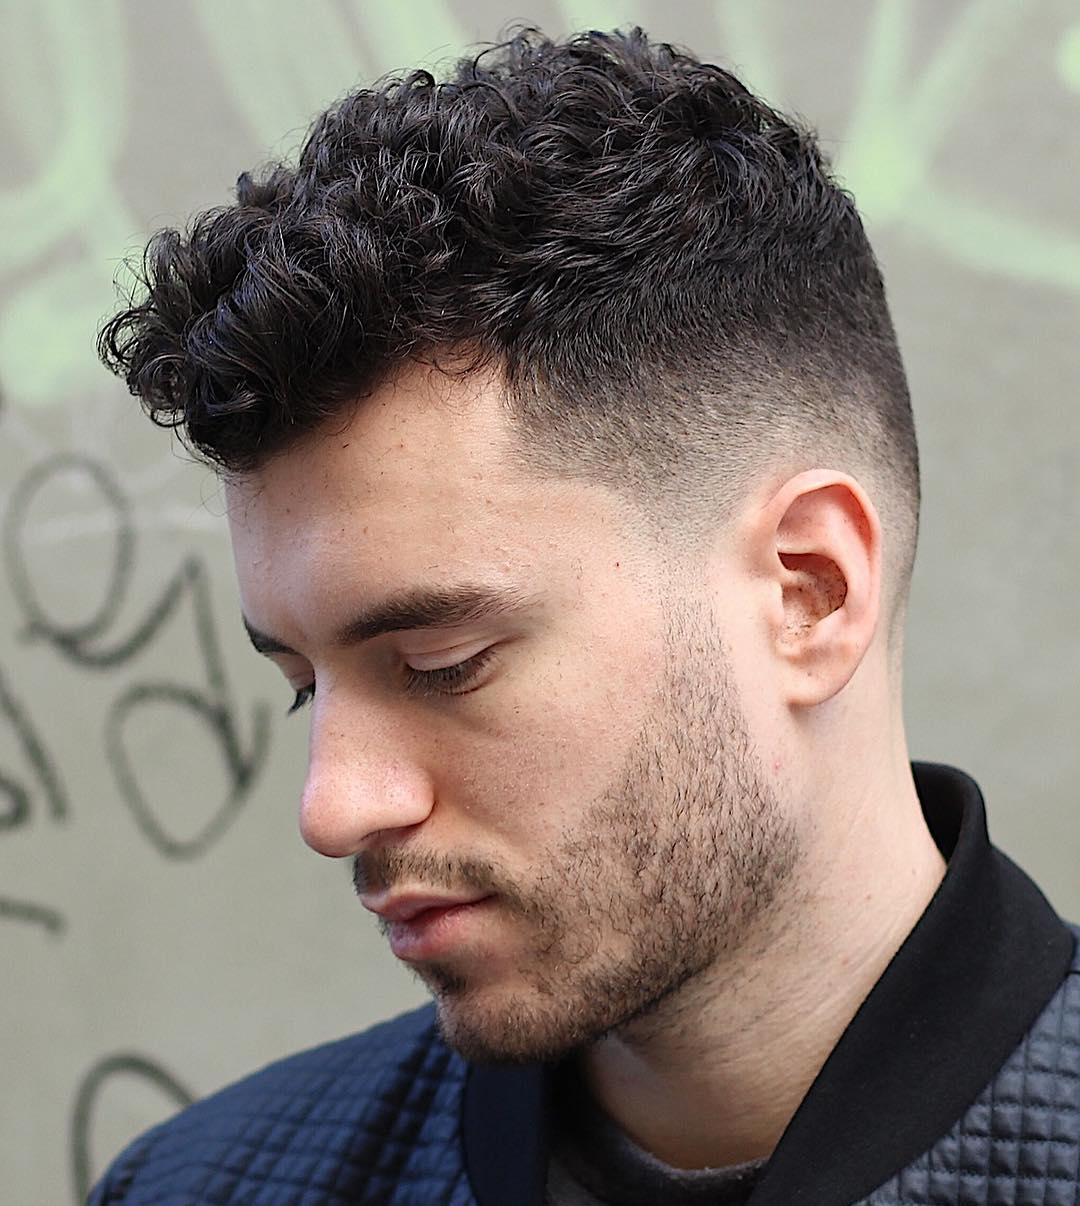 Top 10 Men's Curly Hairstyles